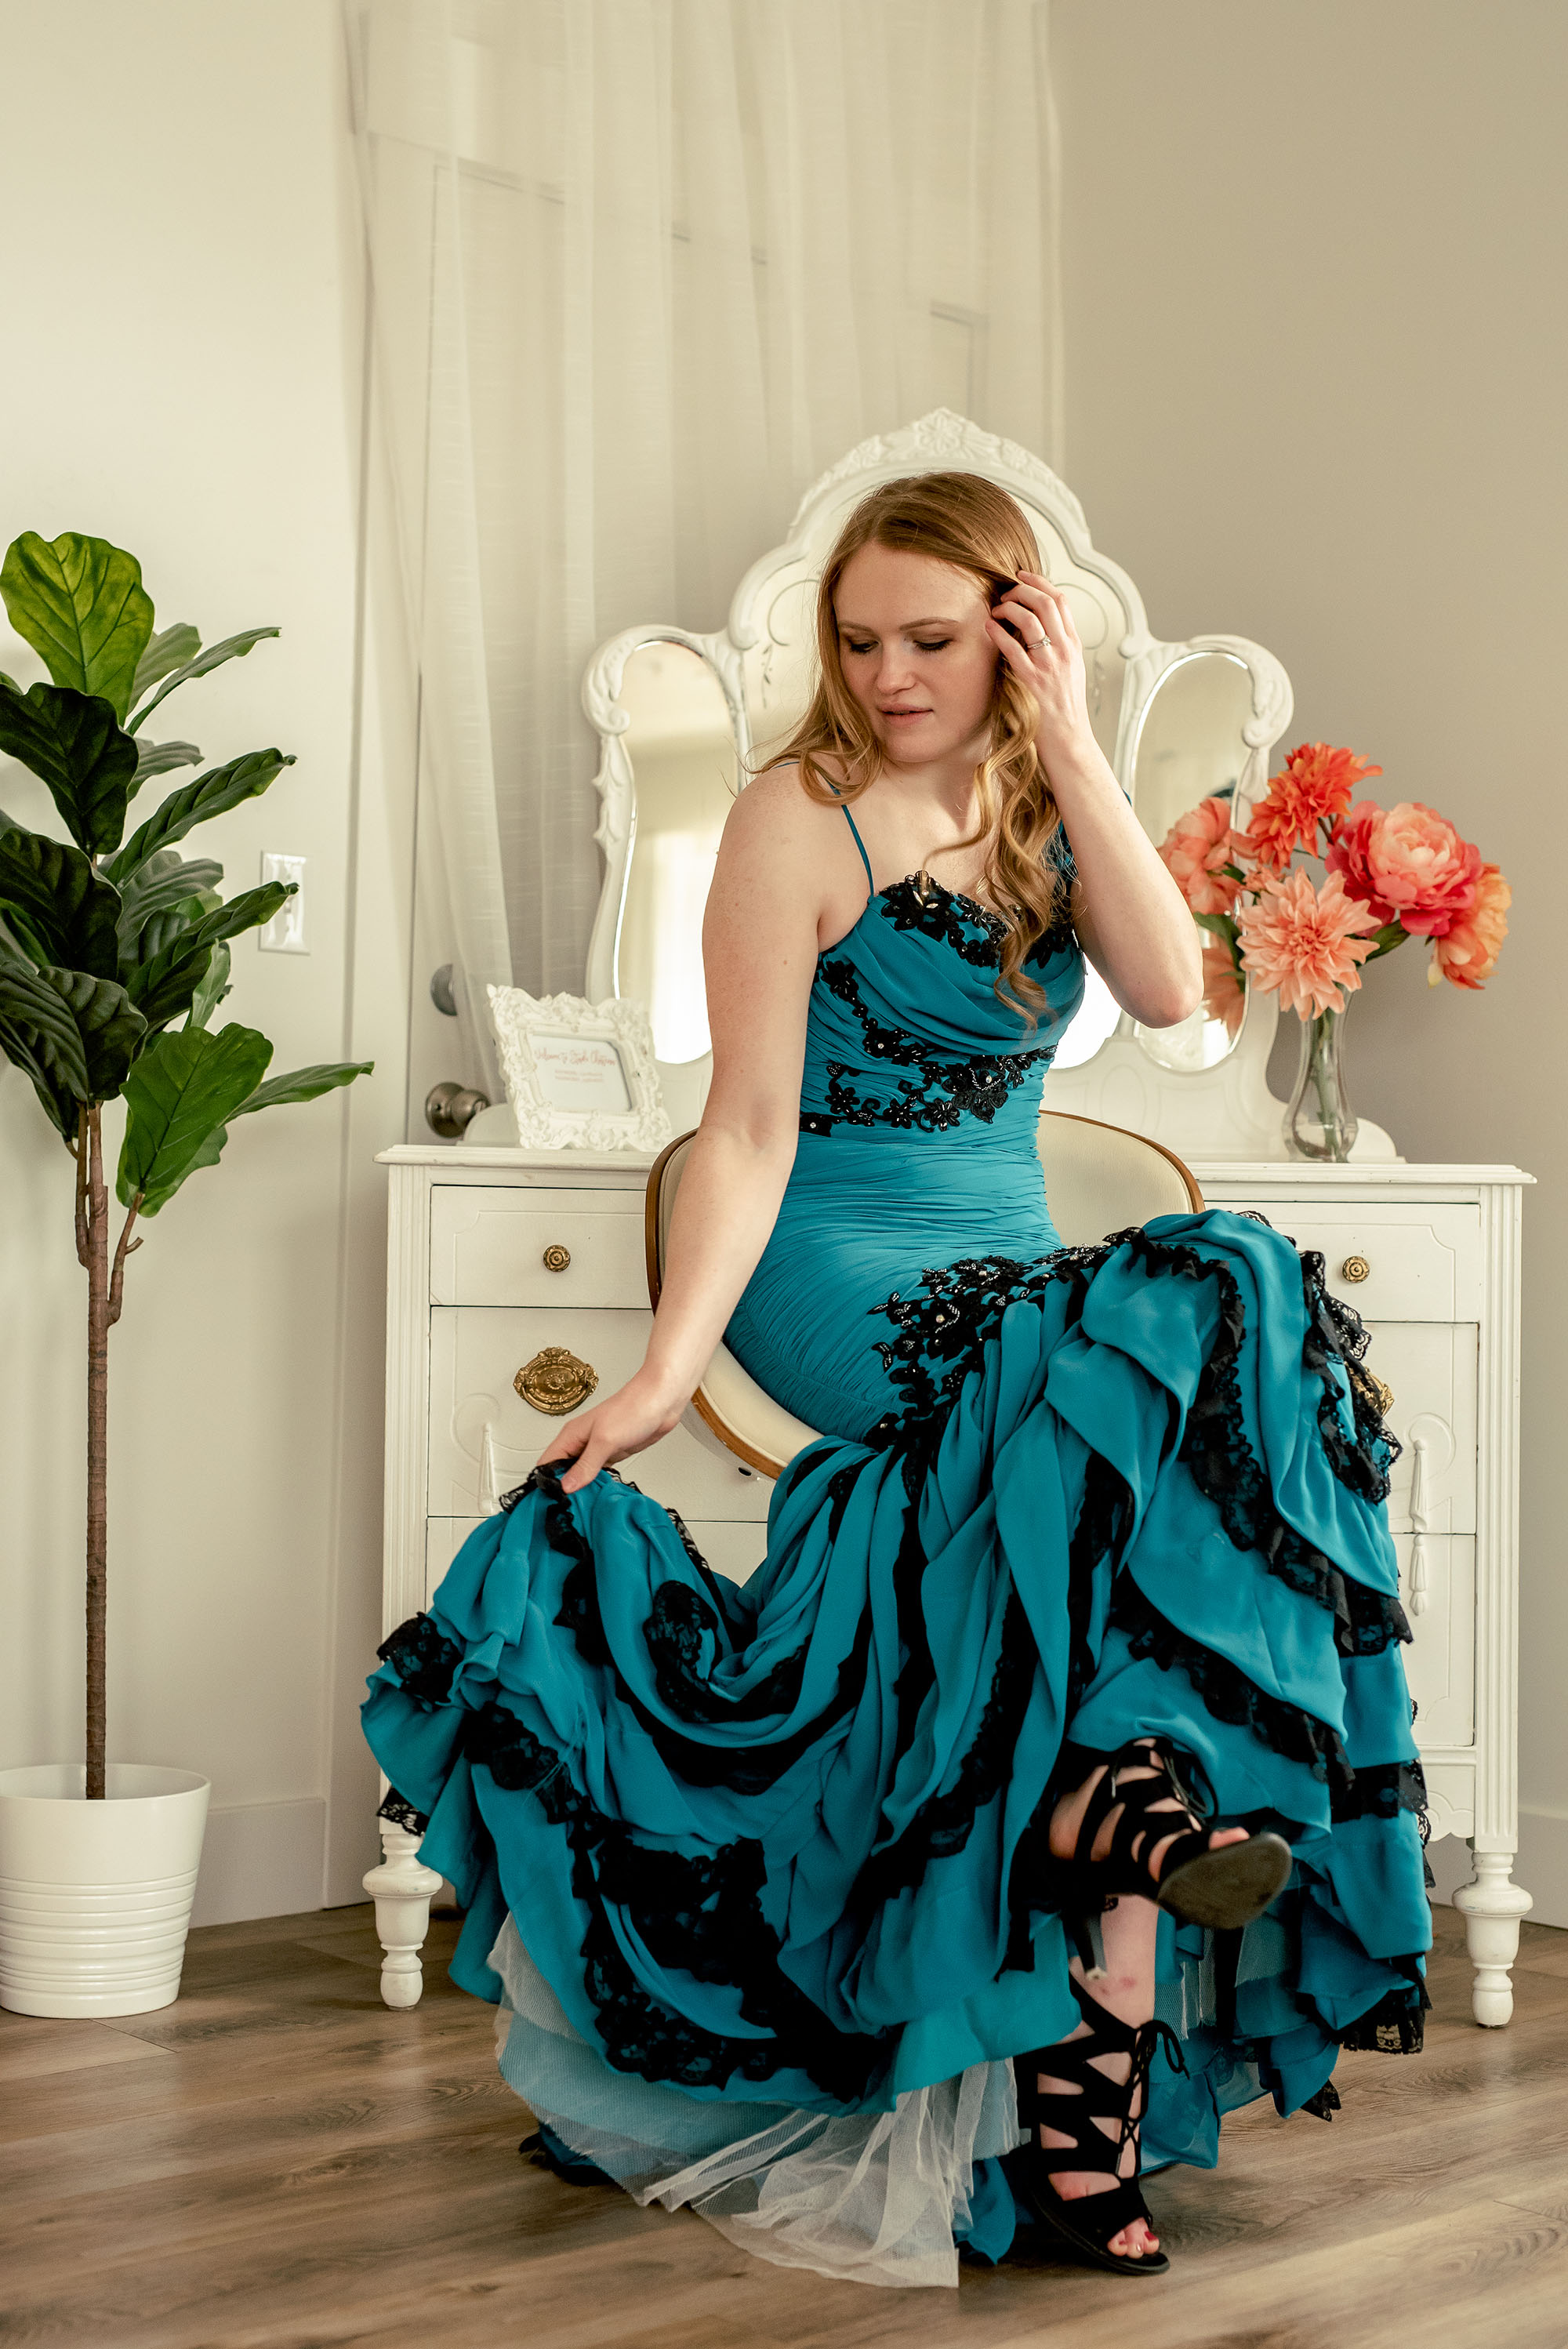 Utah Fashion Photography- Fashion Shoot in SLC by Lucy L Photography LLC